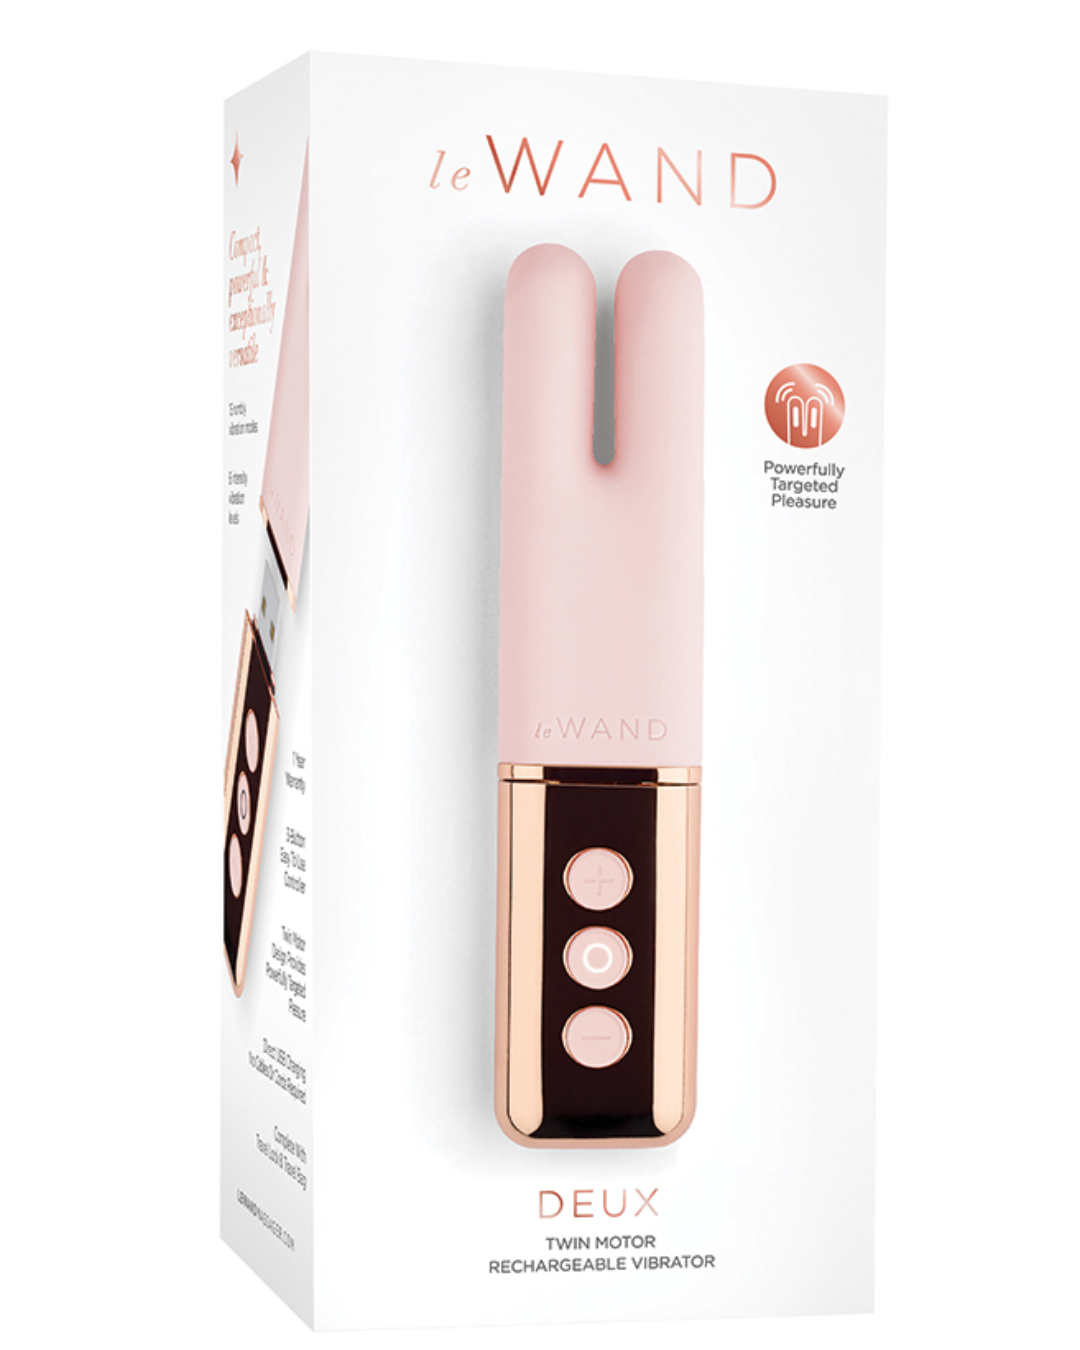 Le Wand Deux Twin Motor Rechargeable Waterproof Vibrator - Rose Gold box